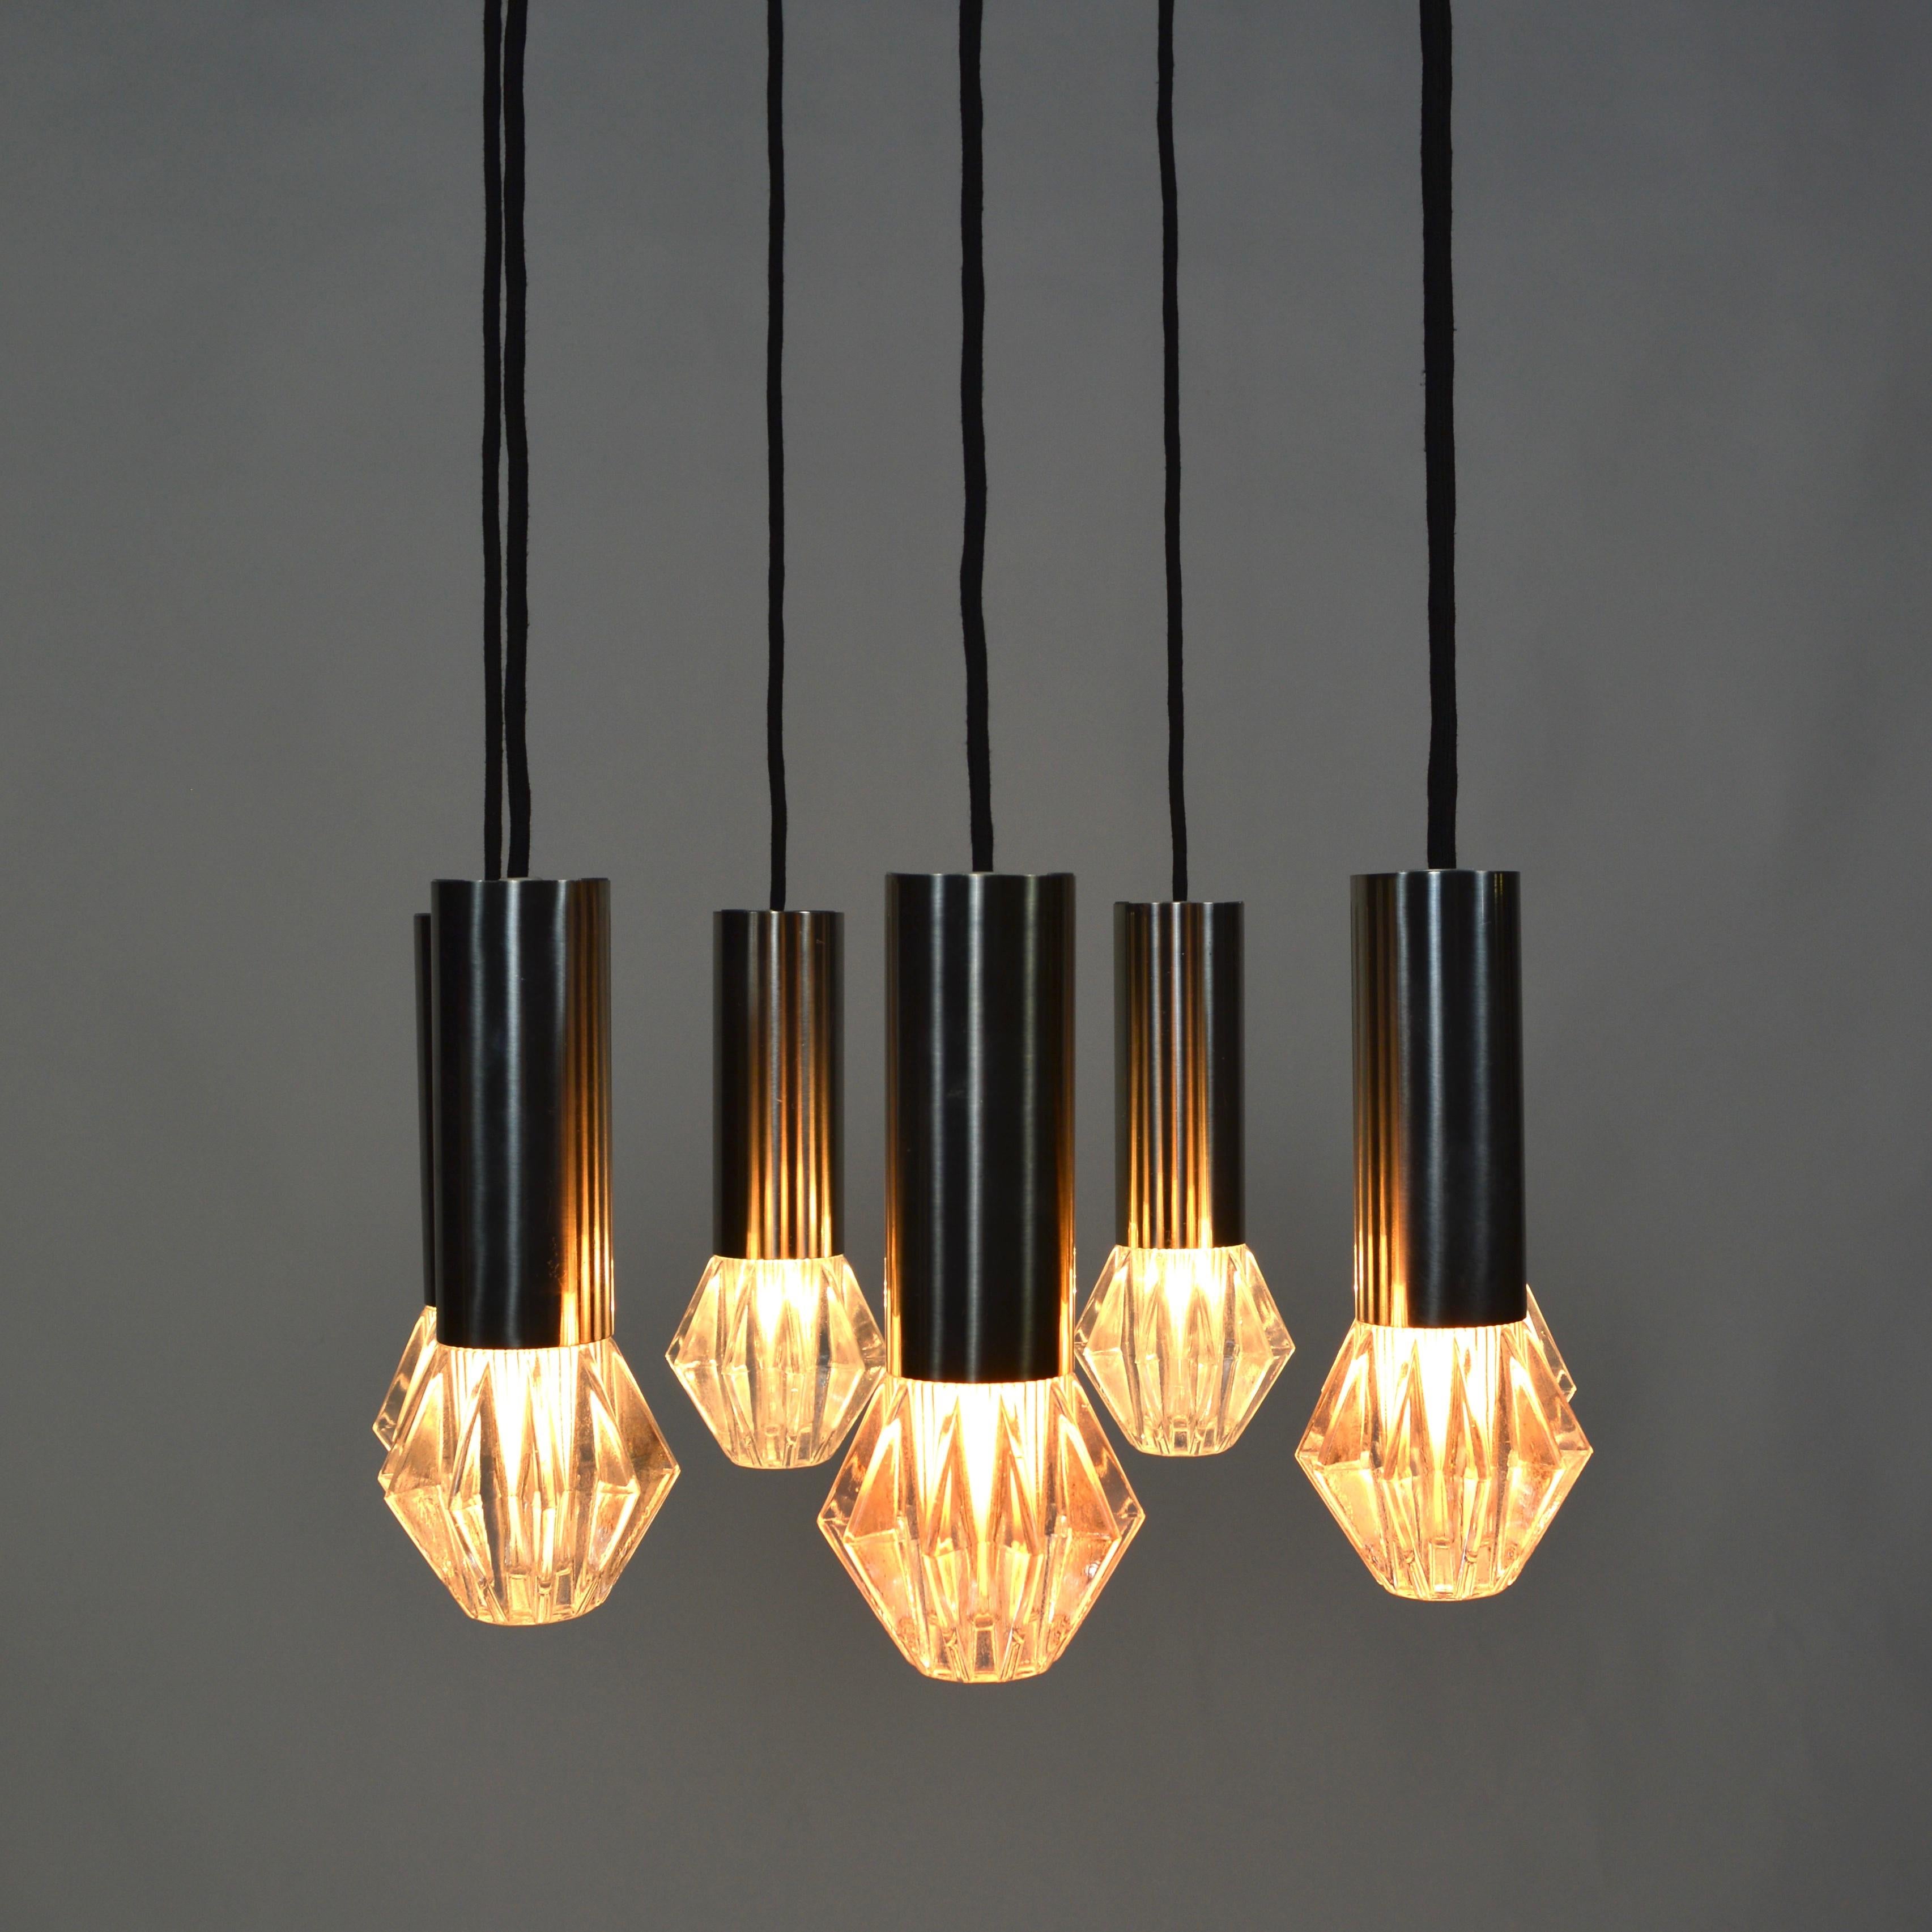 Mid-Century Modern 1970s Chrome and Glass Chandelier, Netherlands For Sale